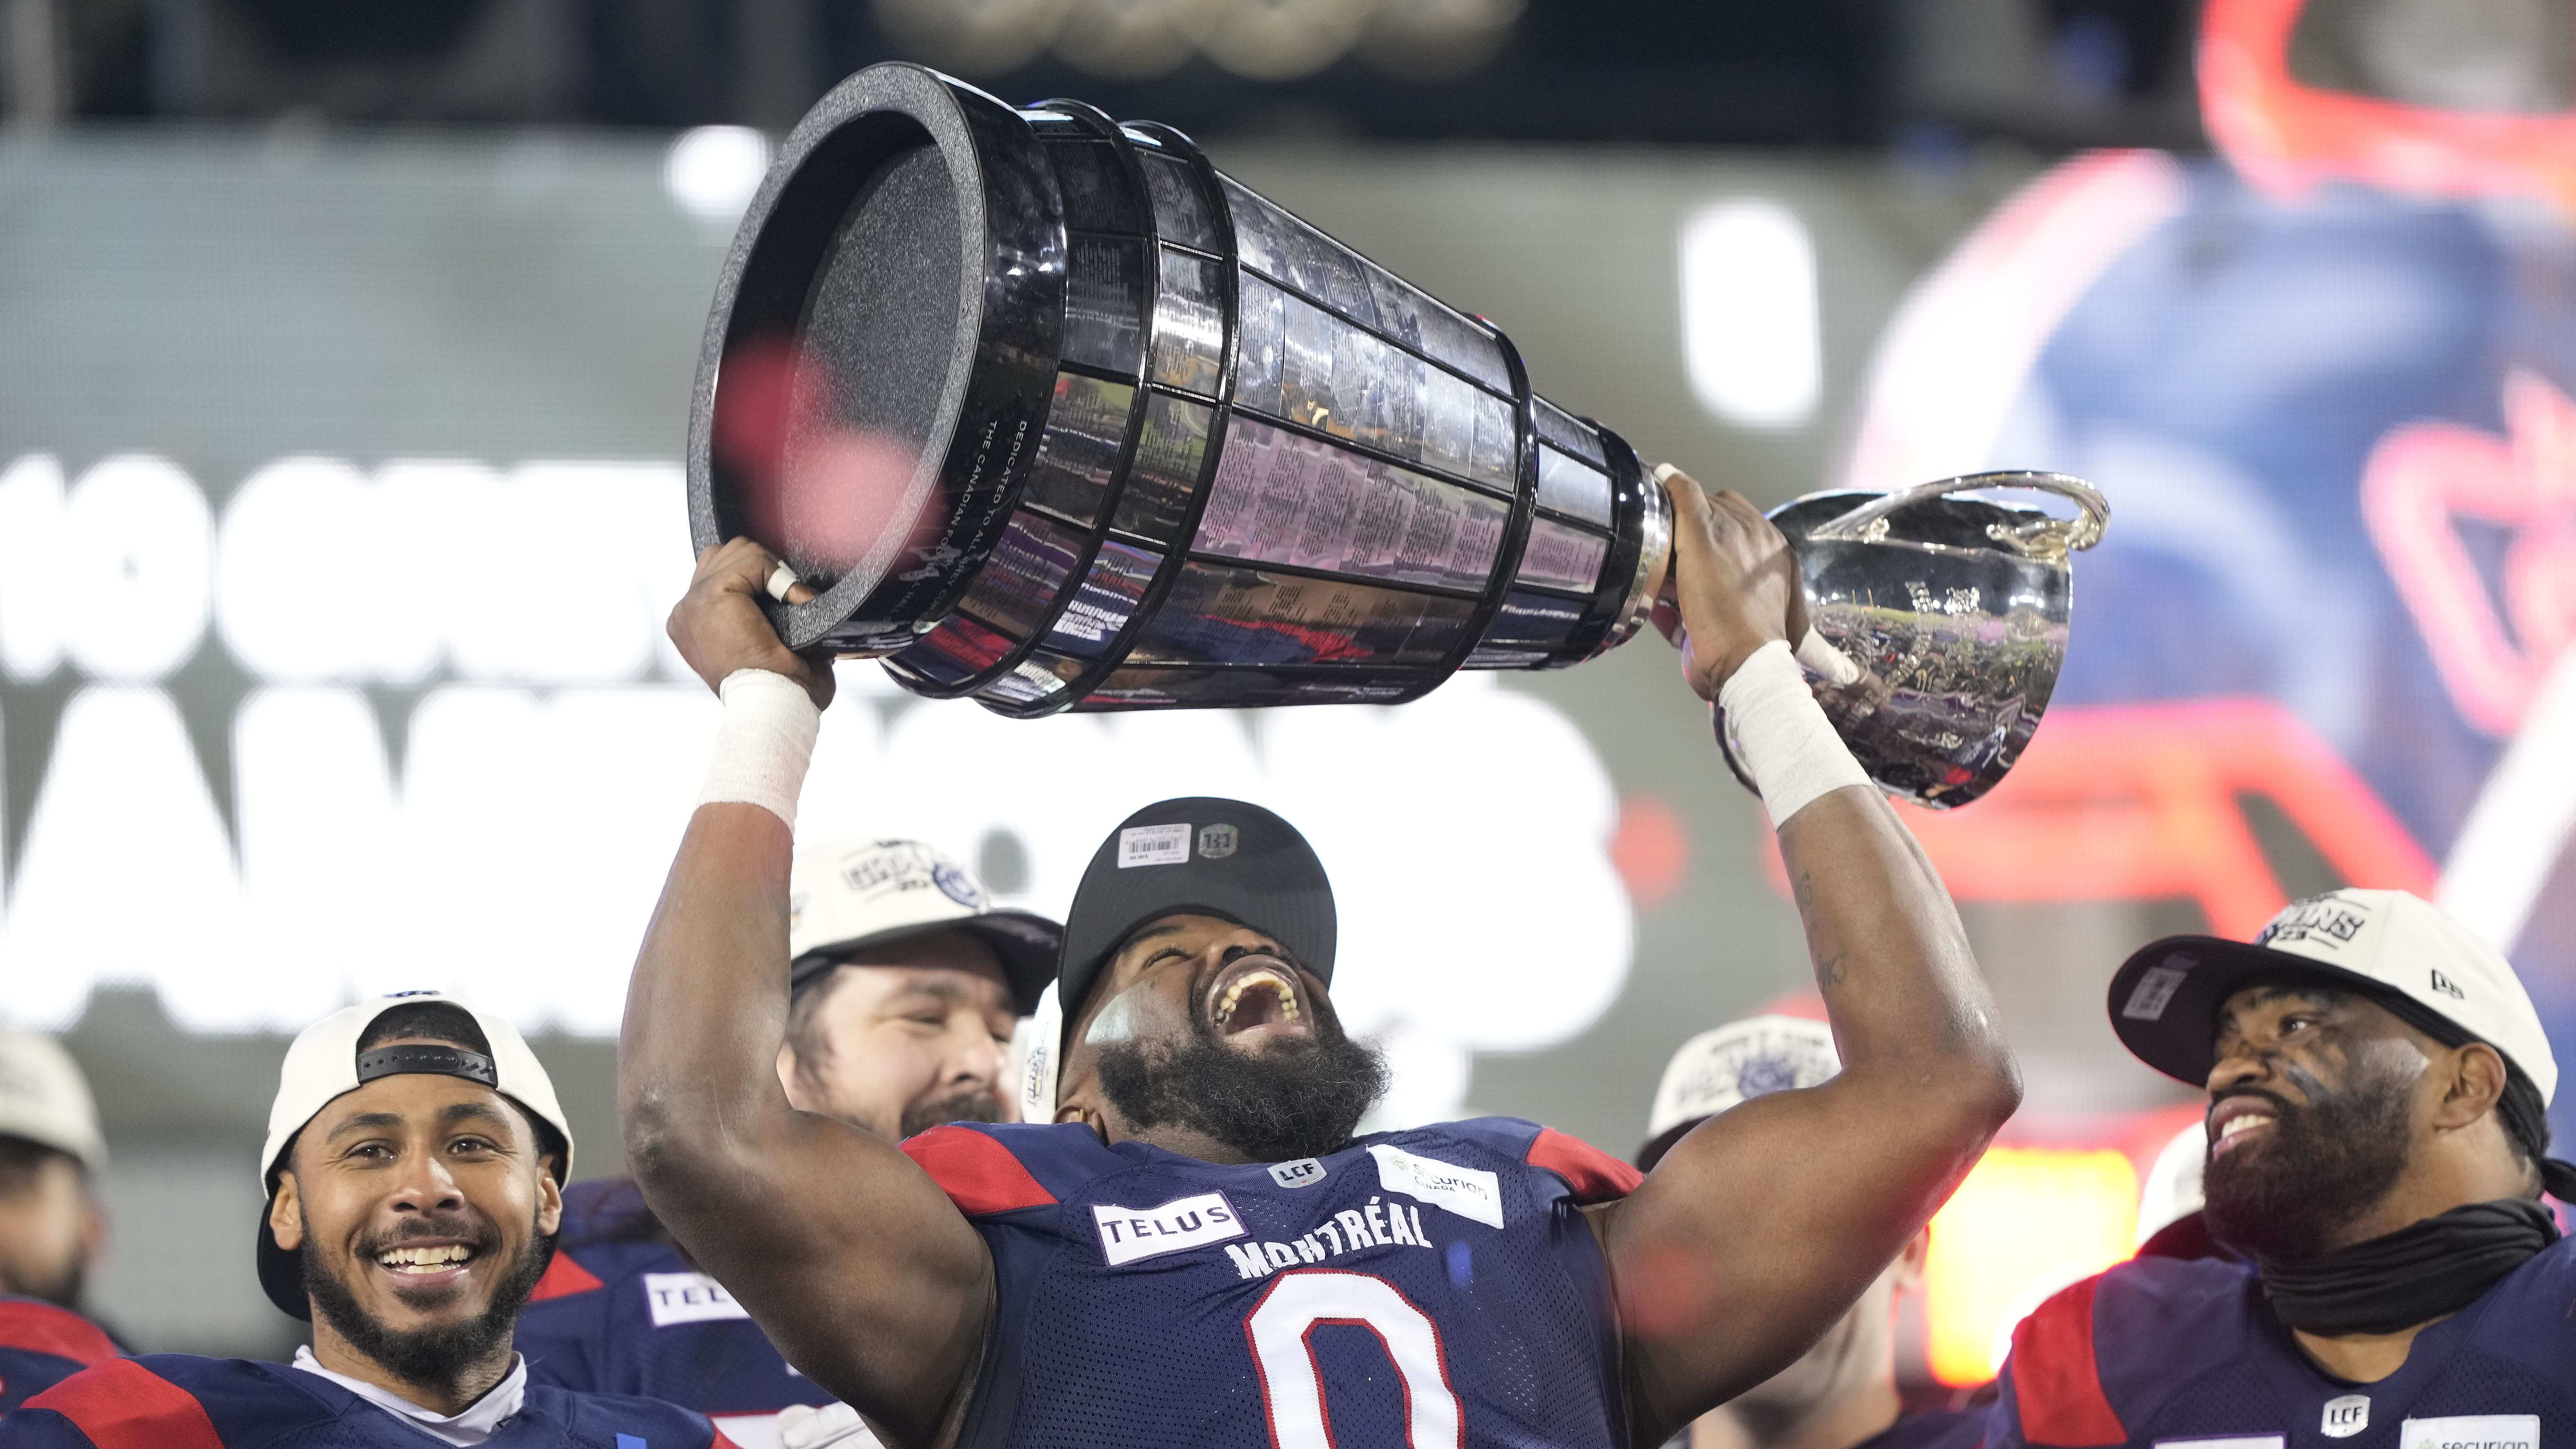 Retired CFL Champ Suspended Indefinitely for Wagering on Games in Which He Played